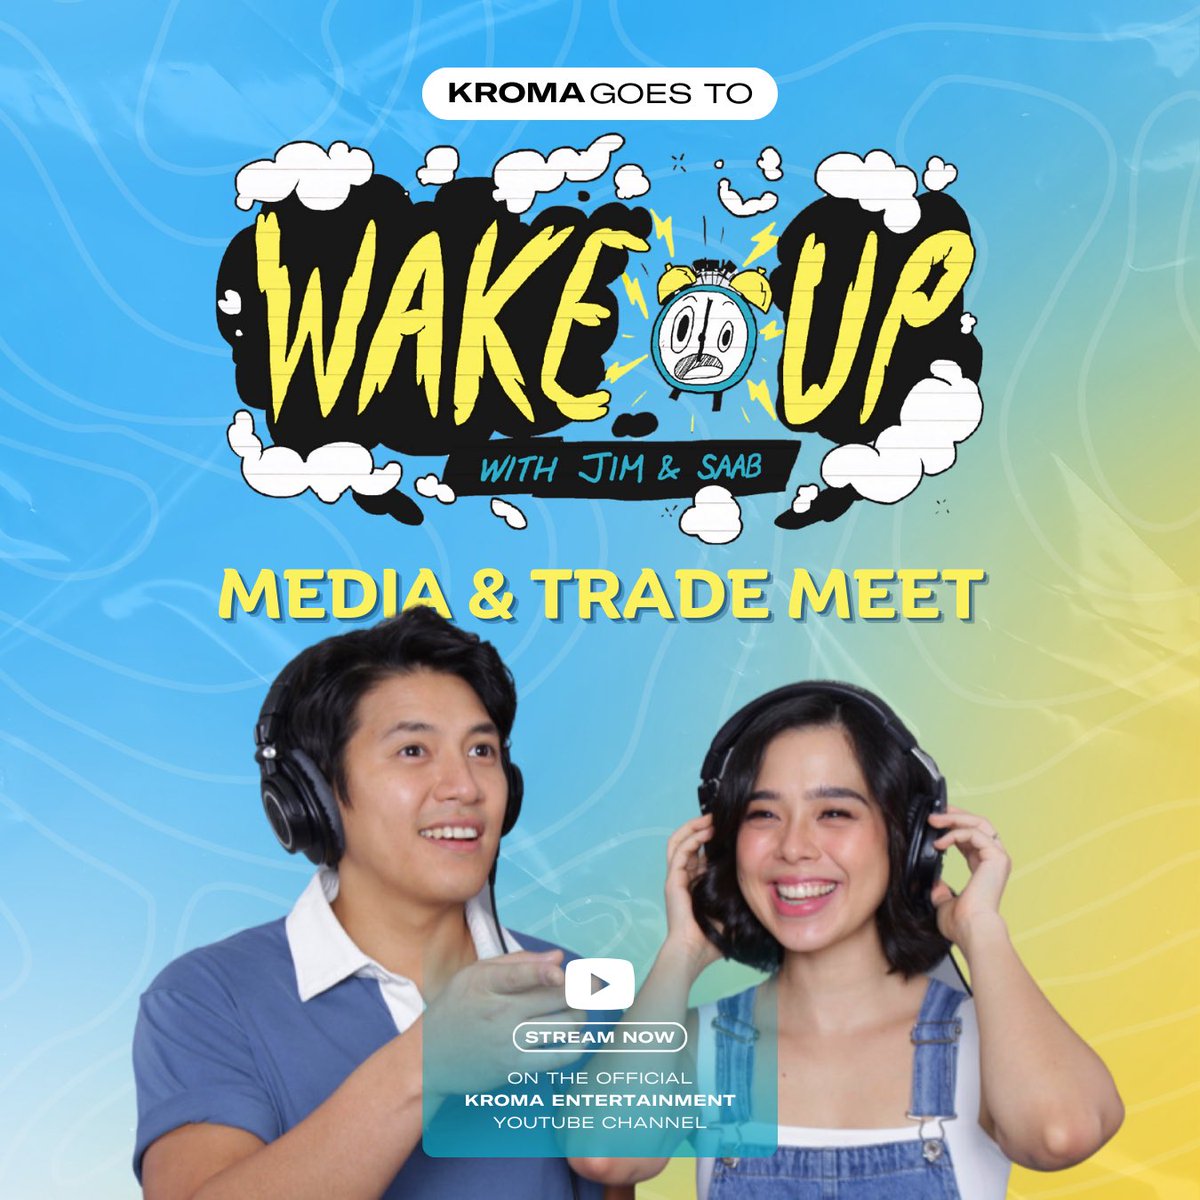 Here’s some good news: 1) Wake Up with Jim & Saab officially enters its new era joining Anima Podcasts with a Media and Trade Meet and 2) we caught its highlights for you to enjoy! Watch Podparents Jim Bacarro and Saab Magalona celebrate this collaboration with a fun-filled